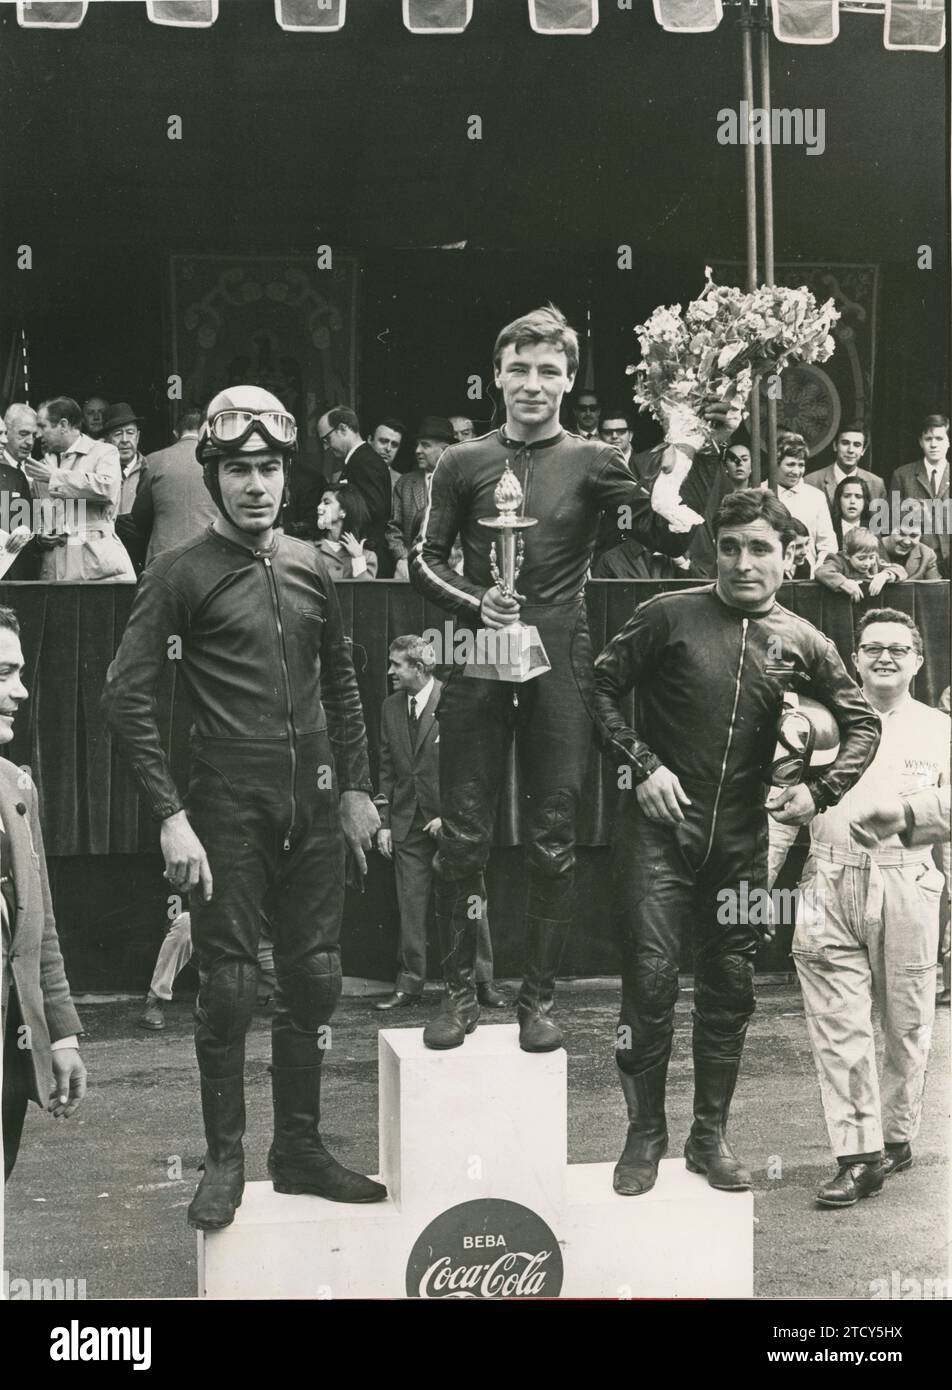 Madrid, May 1969. Ángel Nieto on the podium of the 125 cc race held in Retiro Park, in which he was the winner. Credit: Album / Archivo ABC / Teodoro Naranjo Domínguez Stock Photo